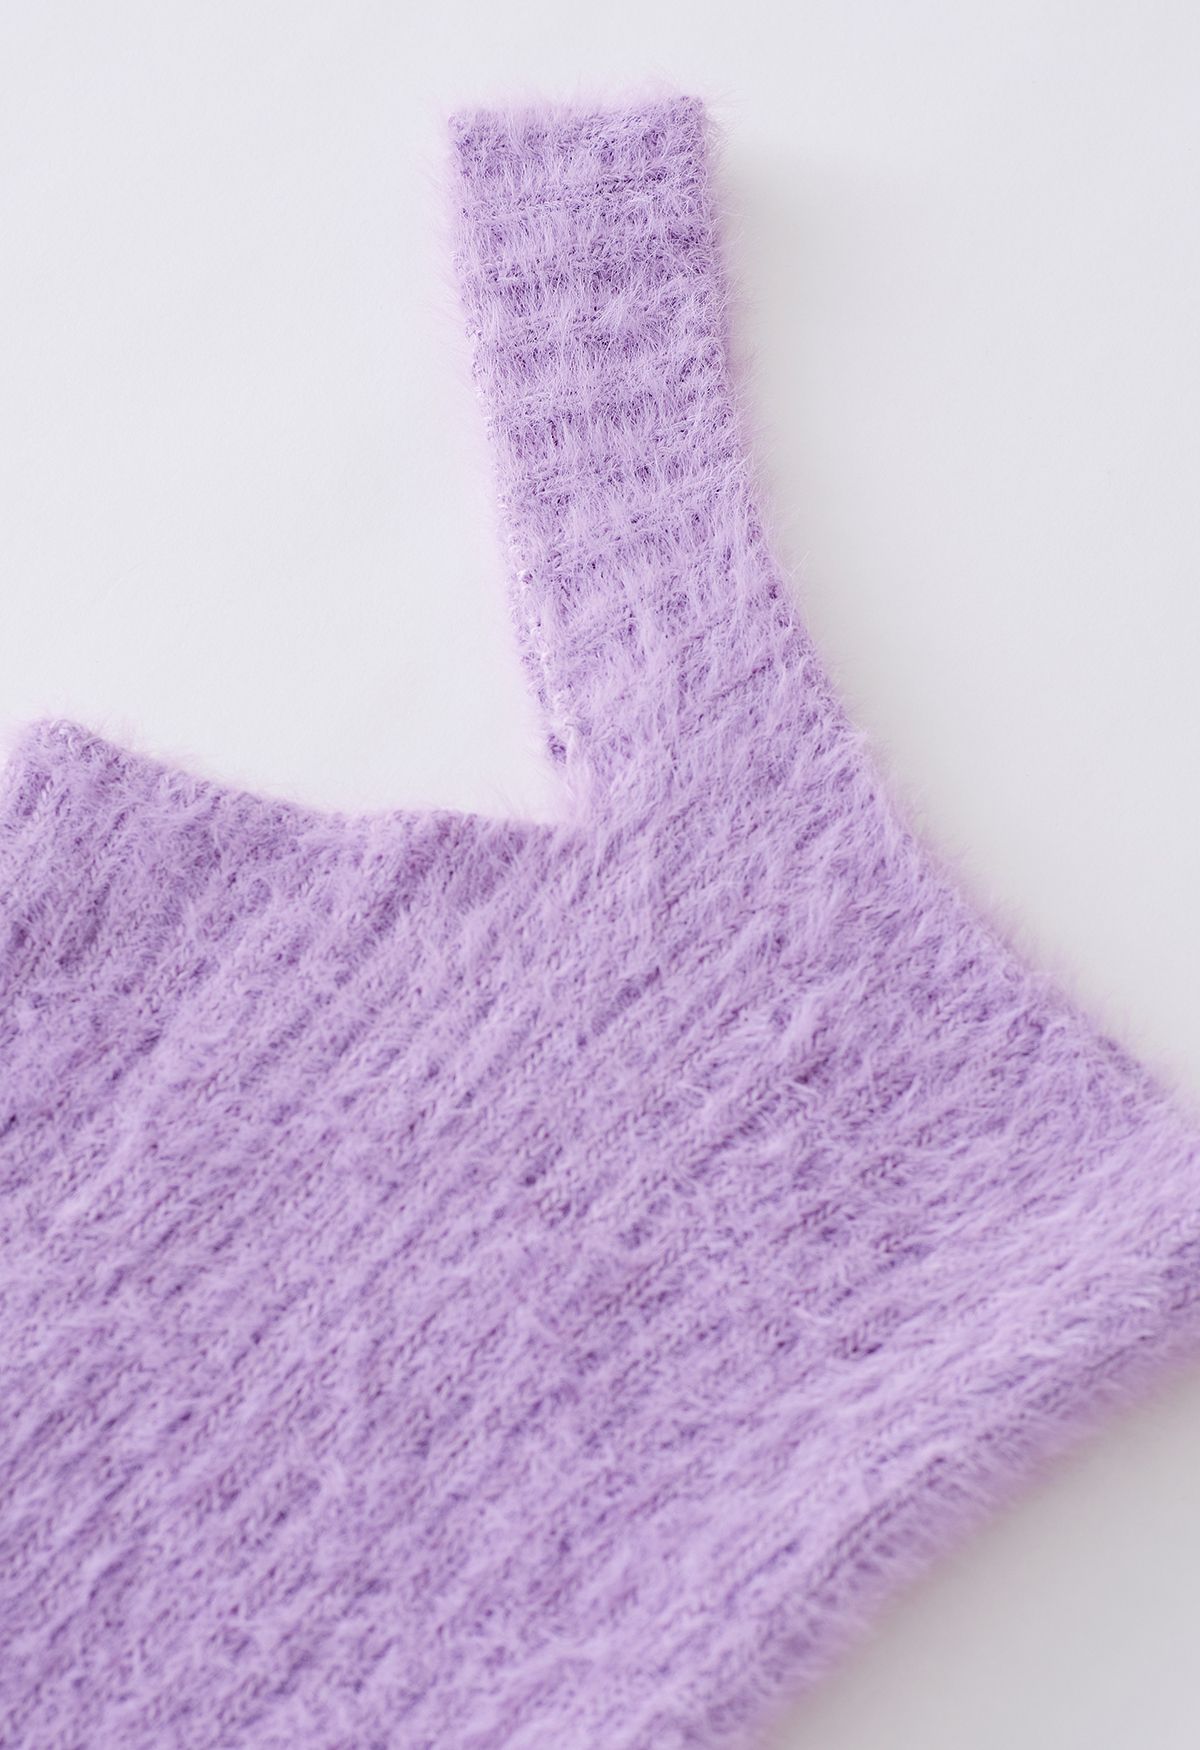 One-Shoulder Fuzzy Knit Top and Cardigan Set in Lilac